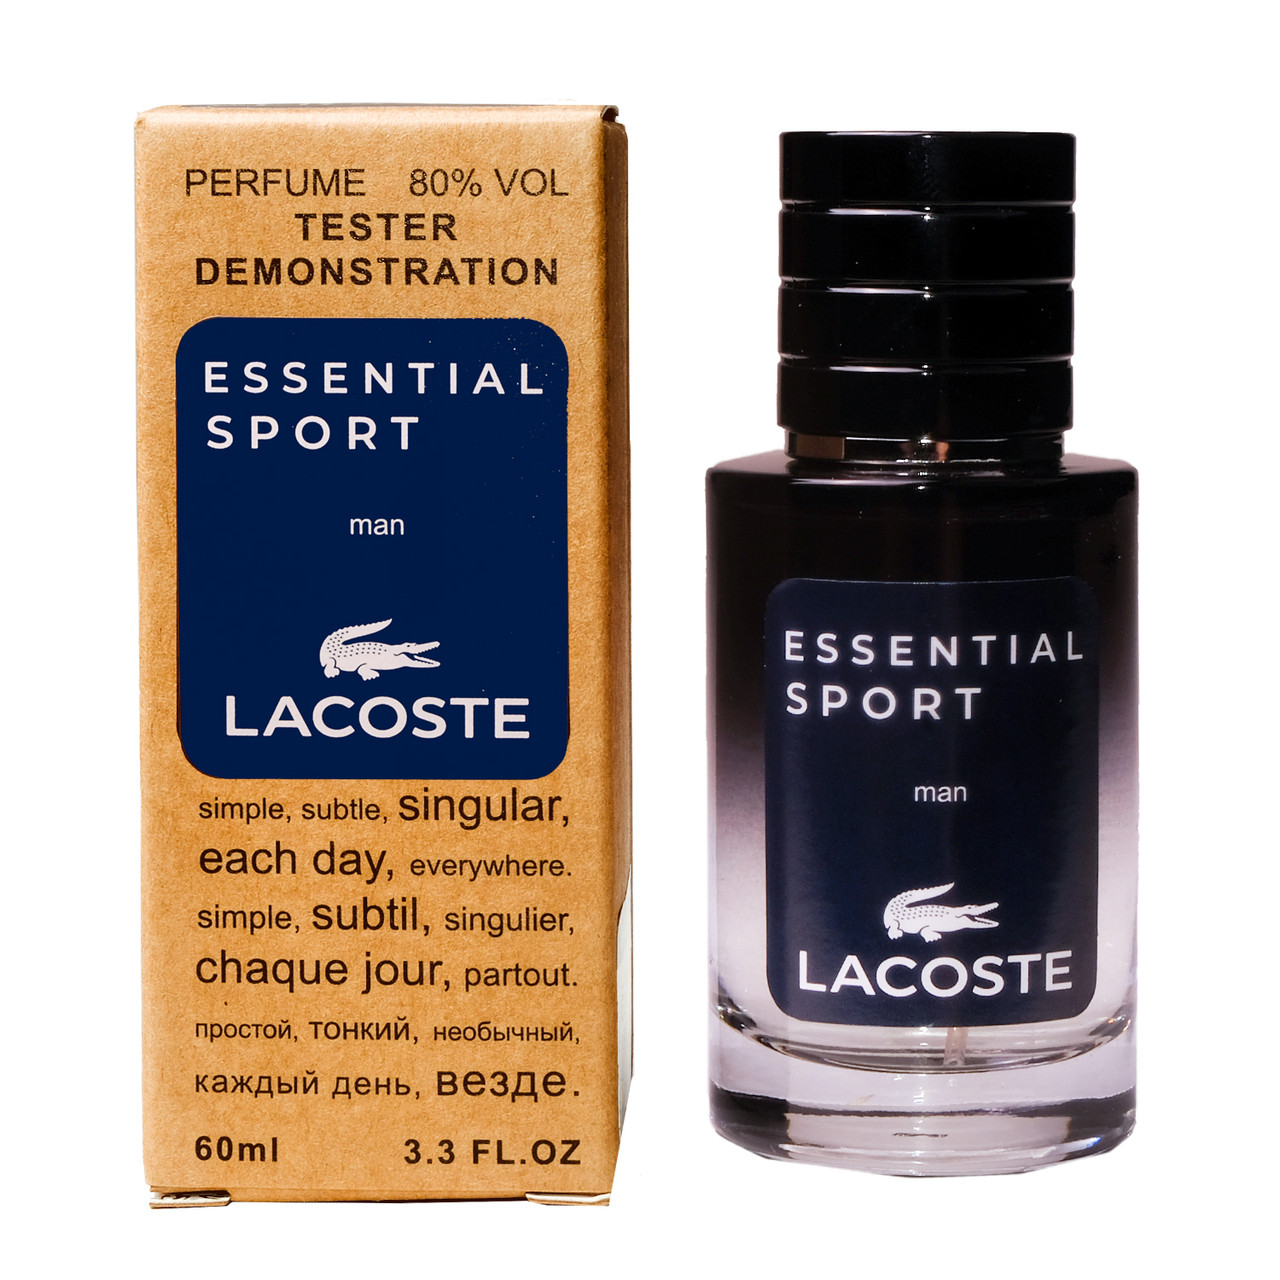 Lacoste Essential Sport TESTER LUX, 60 мл